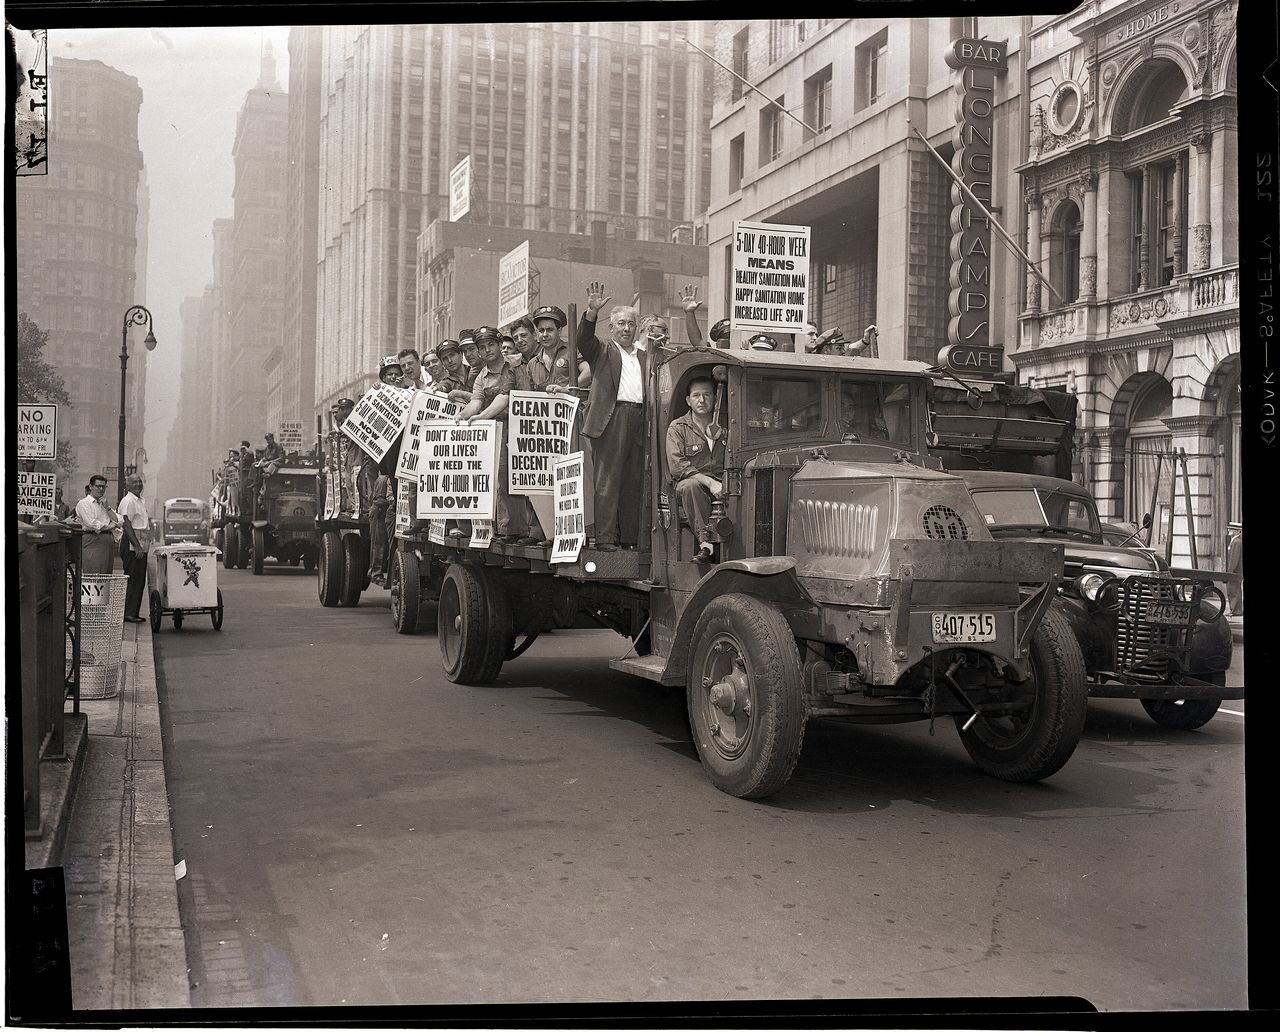 Sanitation workers demonstrate for a five-day, 40-hour workweek in New York in 1952.